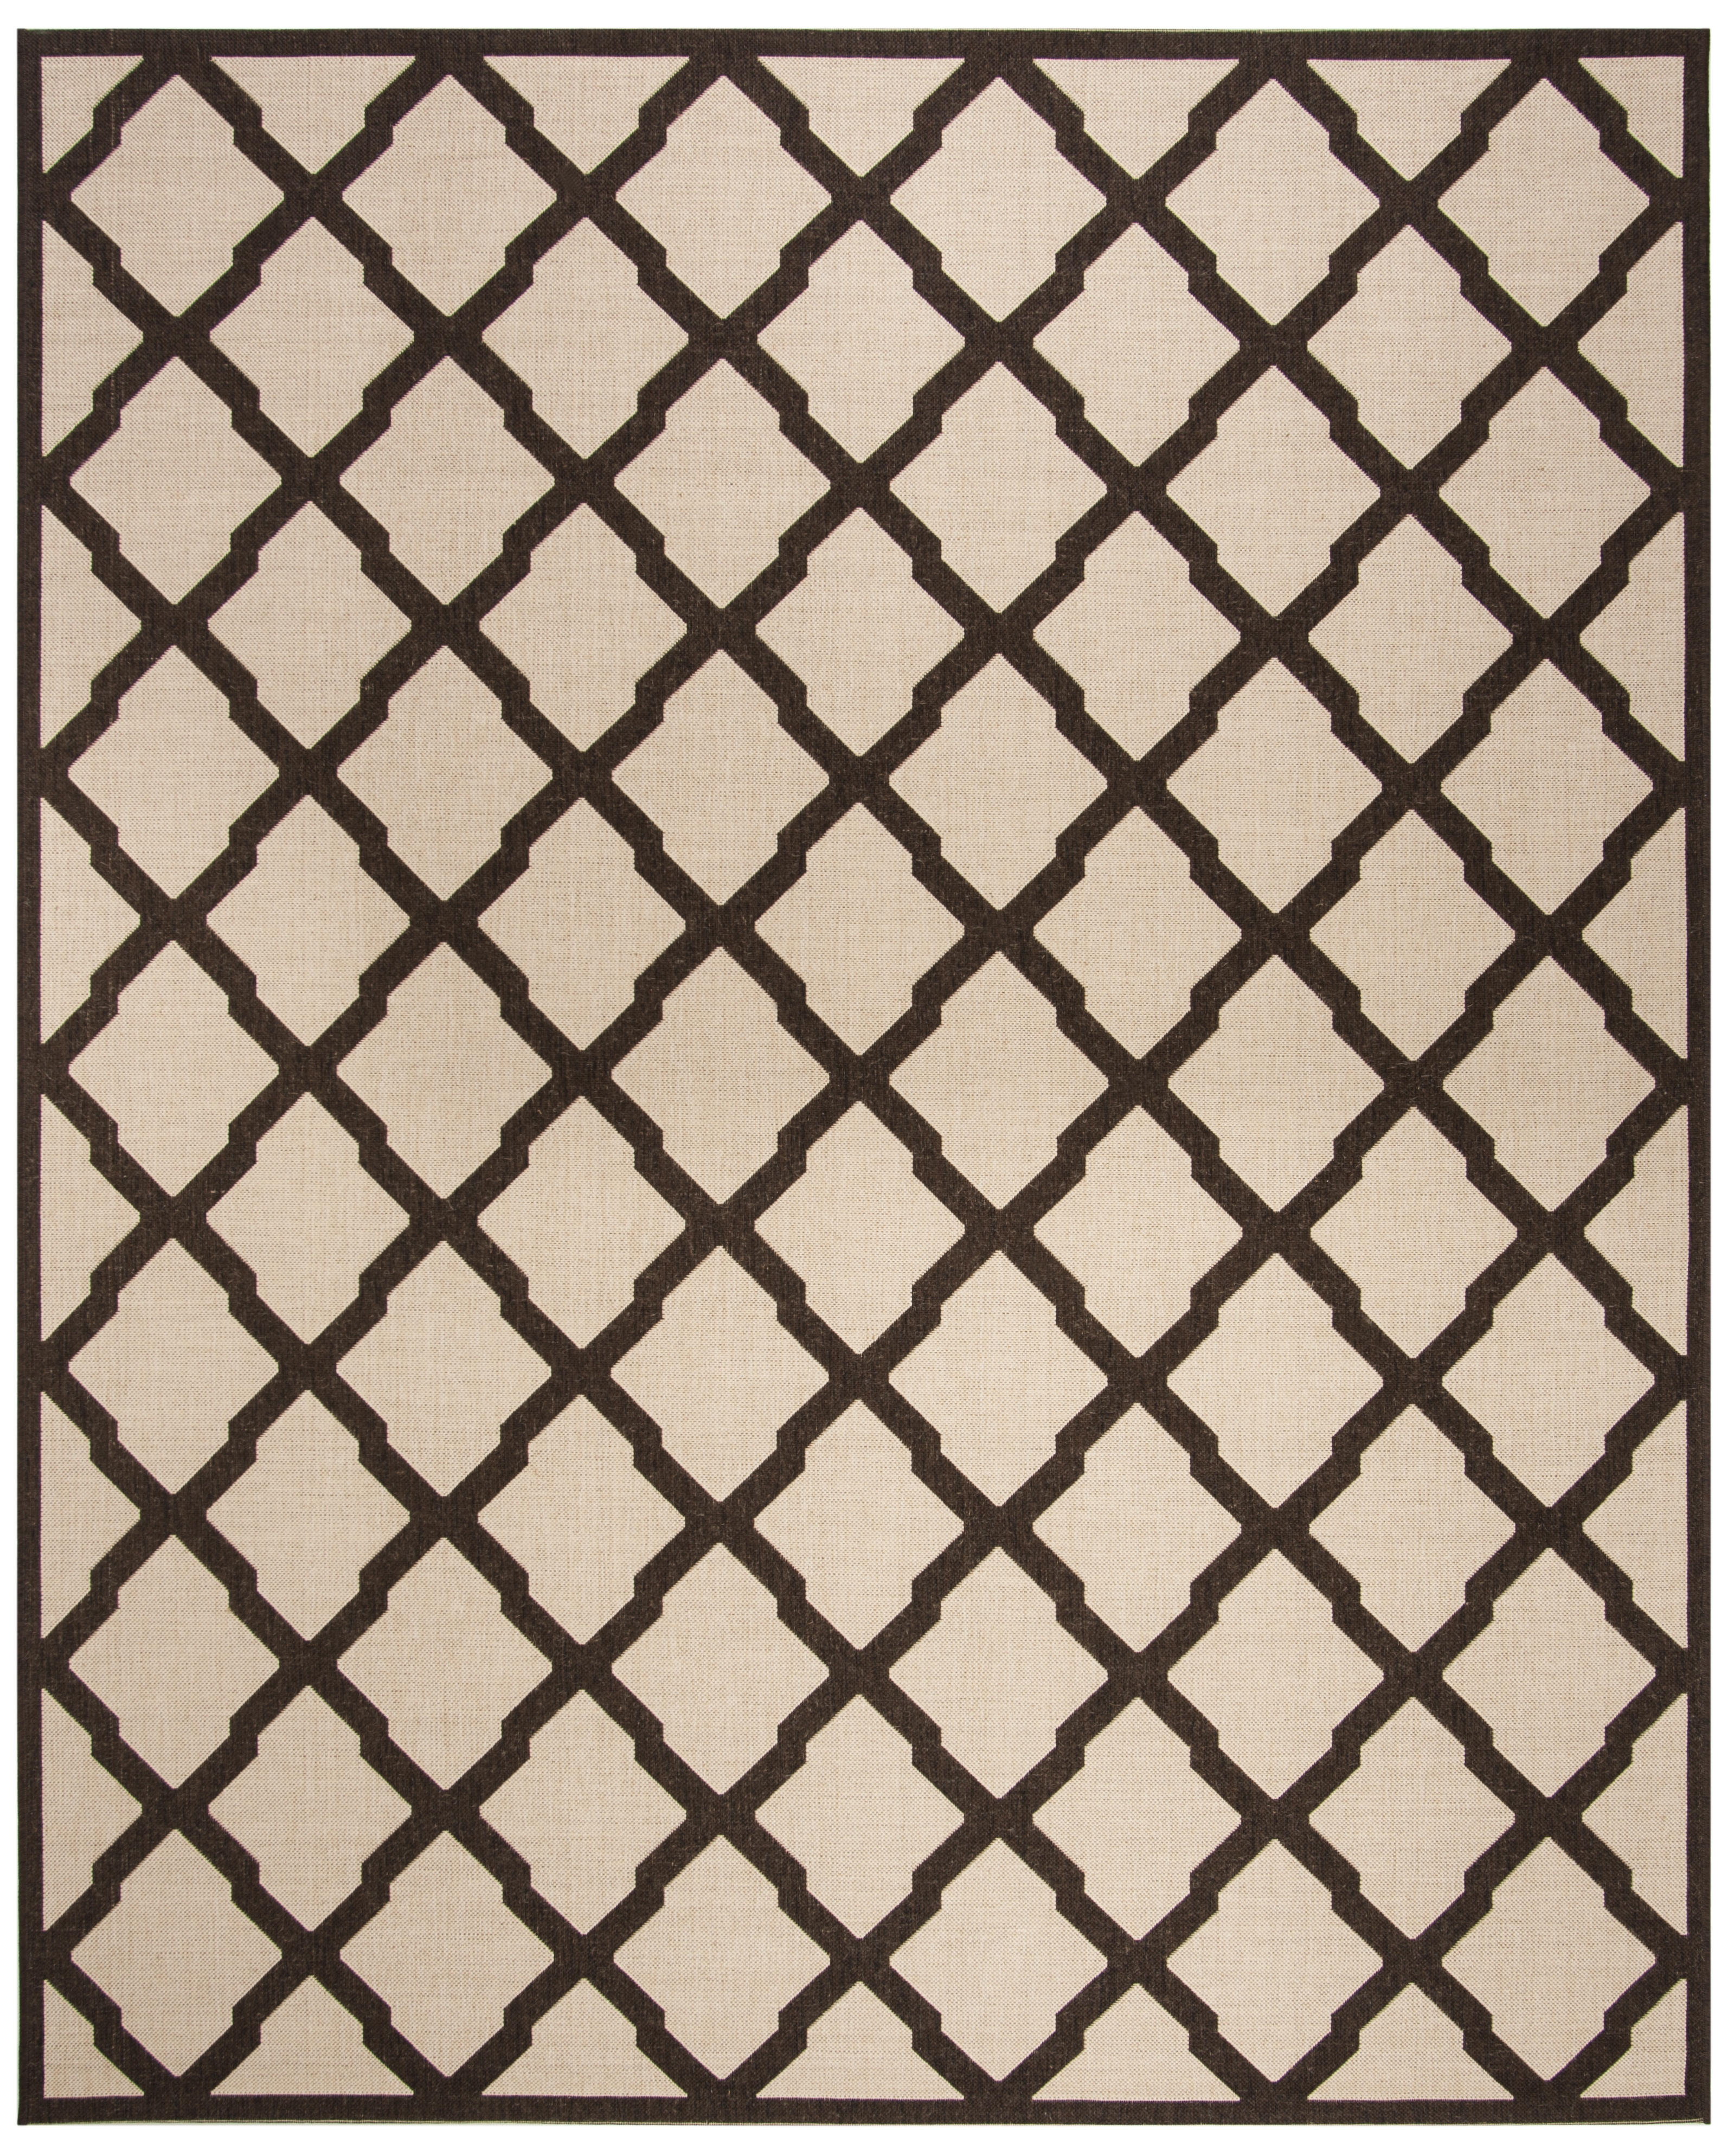 Arlo Home Indoor/Outdoor Woven Area Rug, LND122B, Natural/Brown,  8' X 10' - Image 0